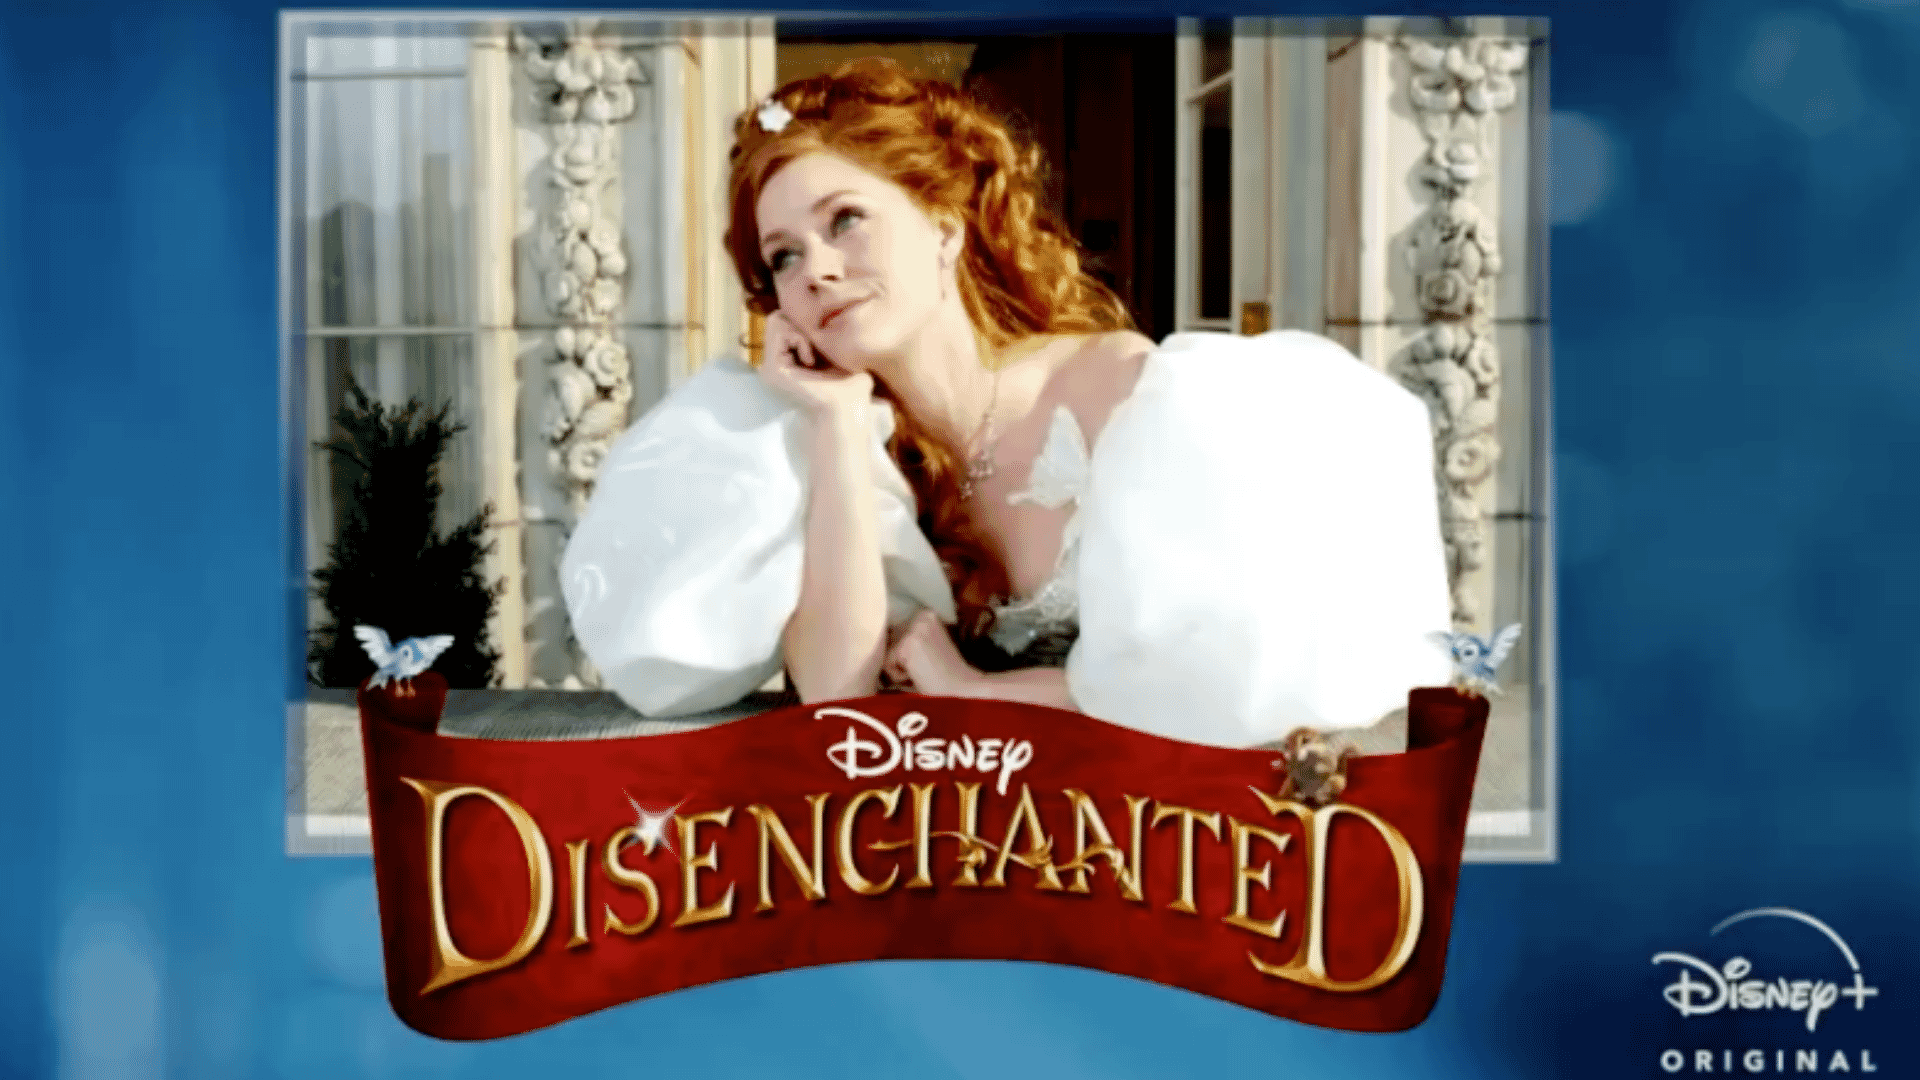 Amy Adams Speaks about Dancing in Her 40s for Upcoming Film ‘Disenchanted’